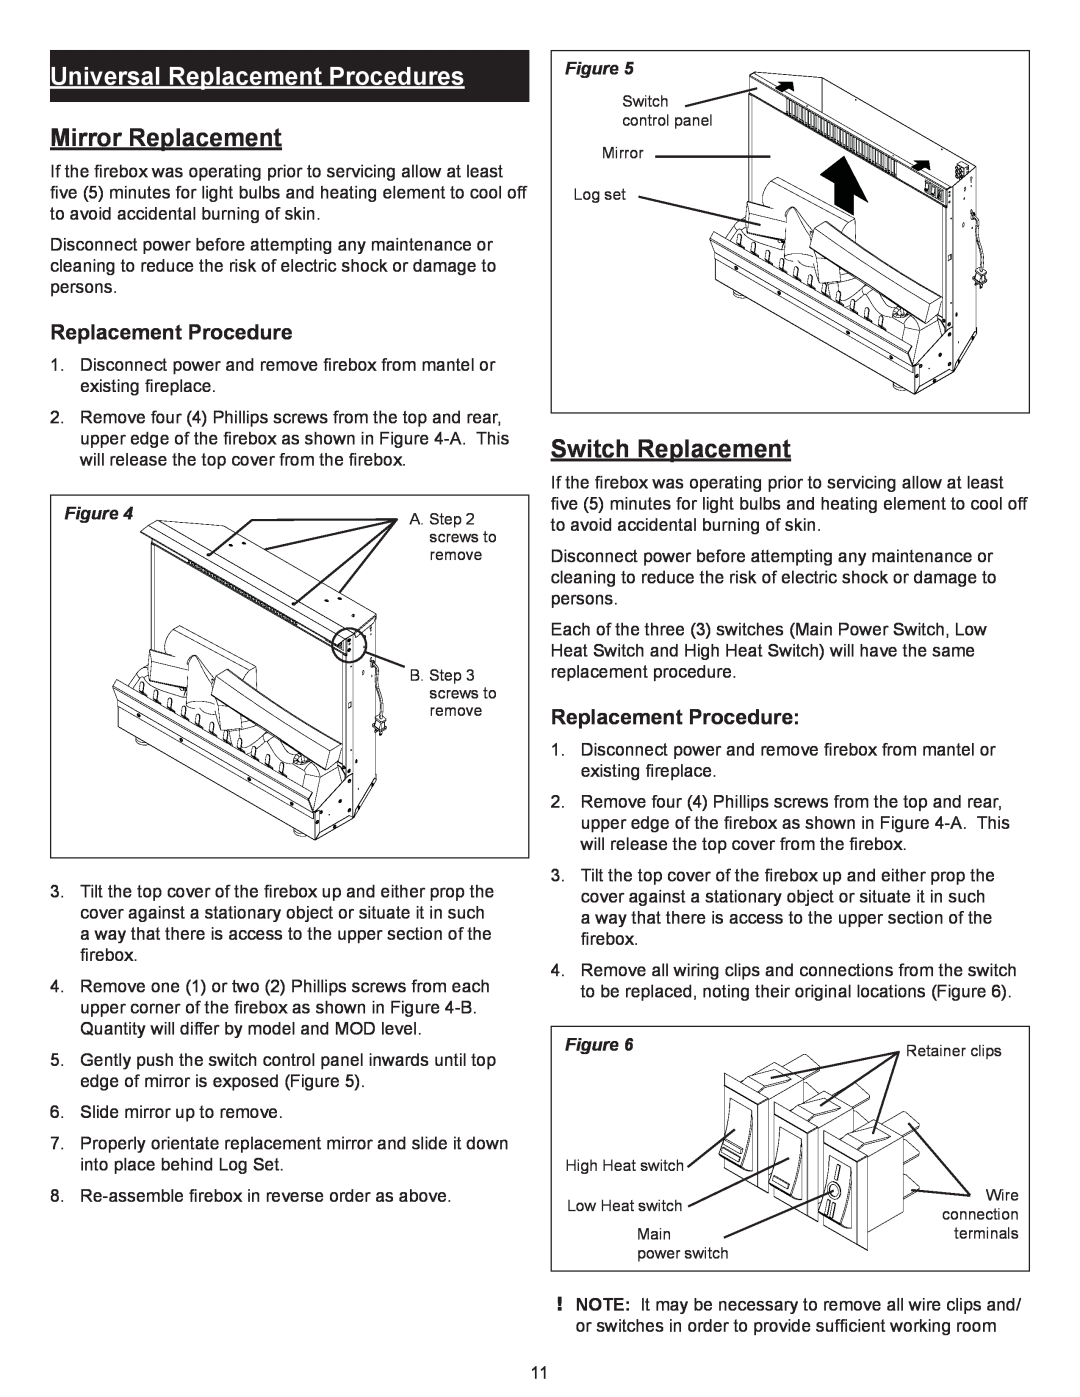 Dimplex Dimplex DFI2309 service manual Universal Replacement Procedures, Mirror Replacement, Switch Replacement 